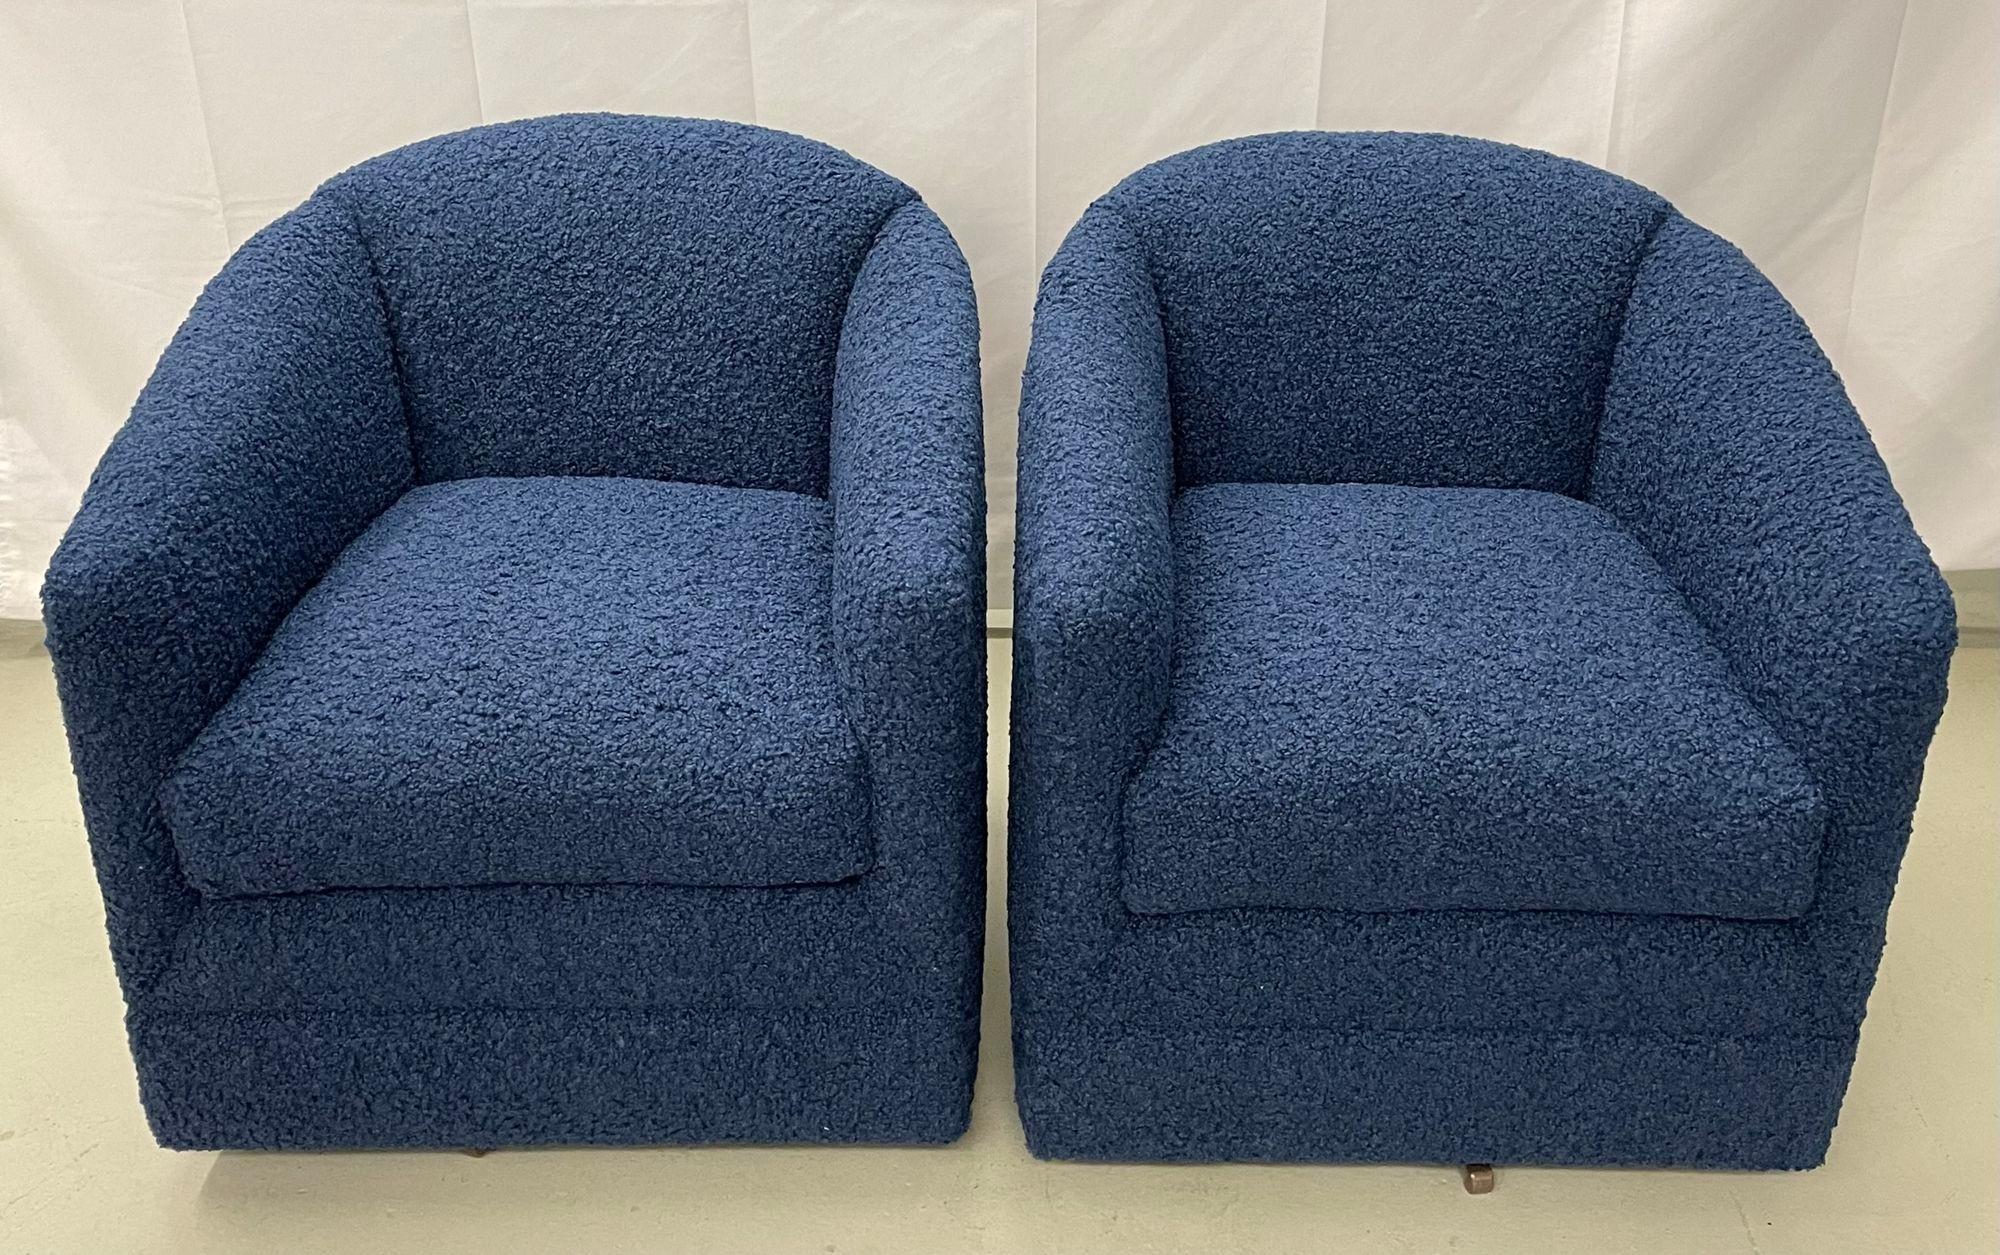 Pair of Mid-Century Modern blue boucle swivel / barrel chairs, Edward Ferrell.
 
Pair of newly re-upholstered Edward Ferrell swivel or barrel back chairs in a cozy blue boucle fabric. 
 
Seat height: 20 inches
 
IZLS